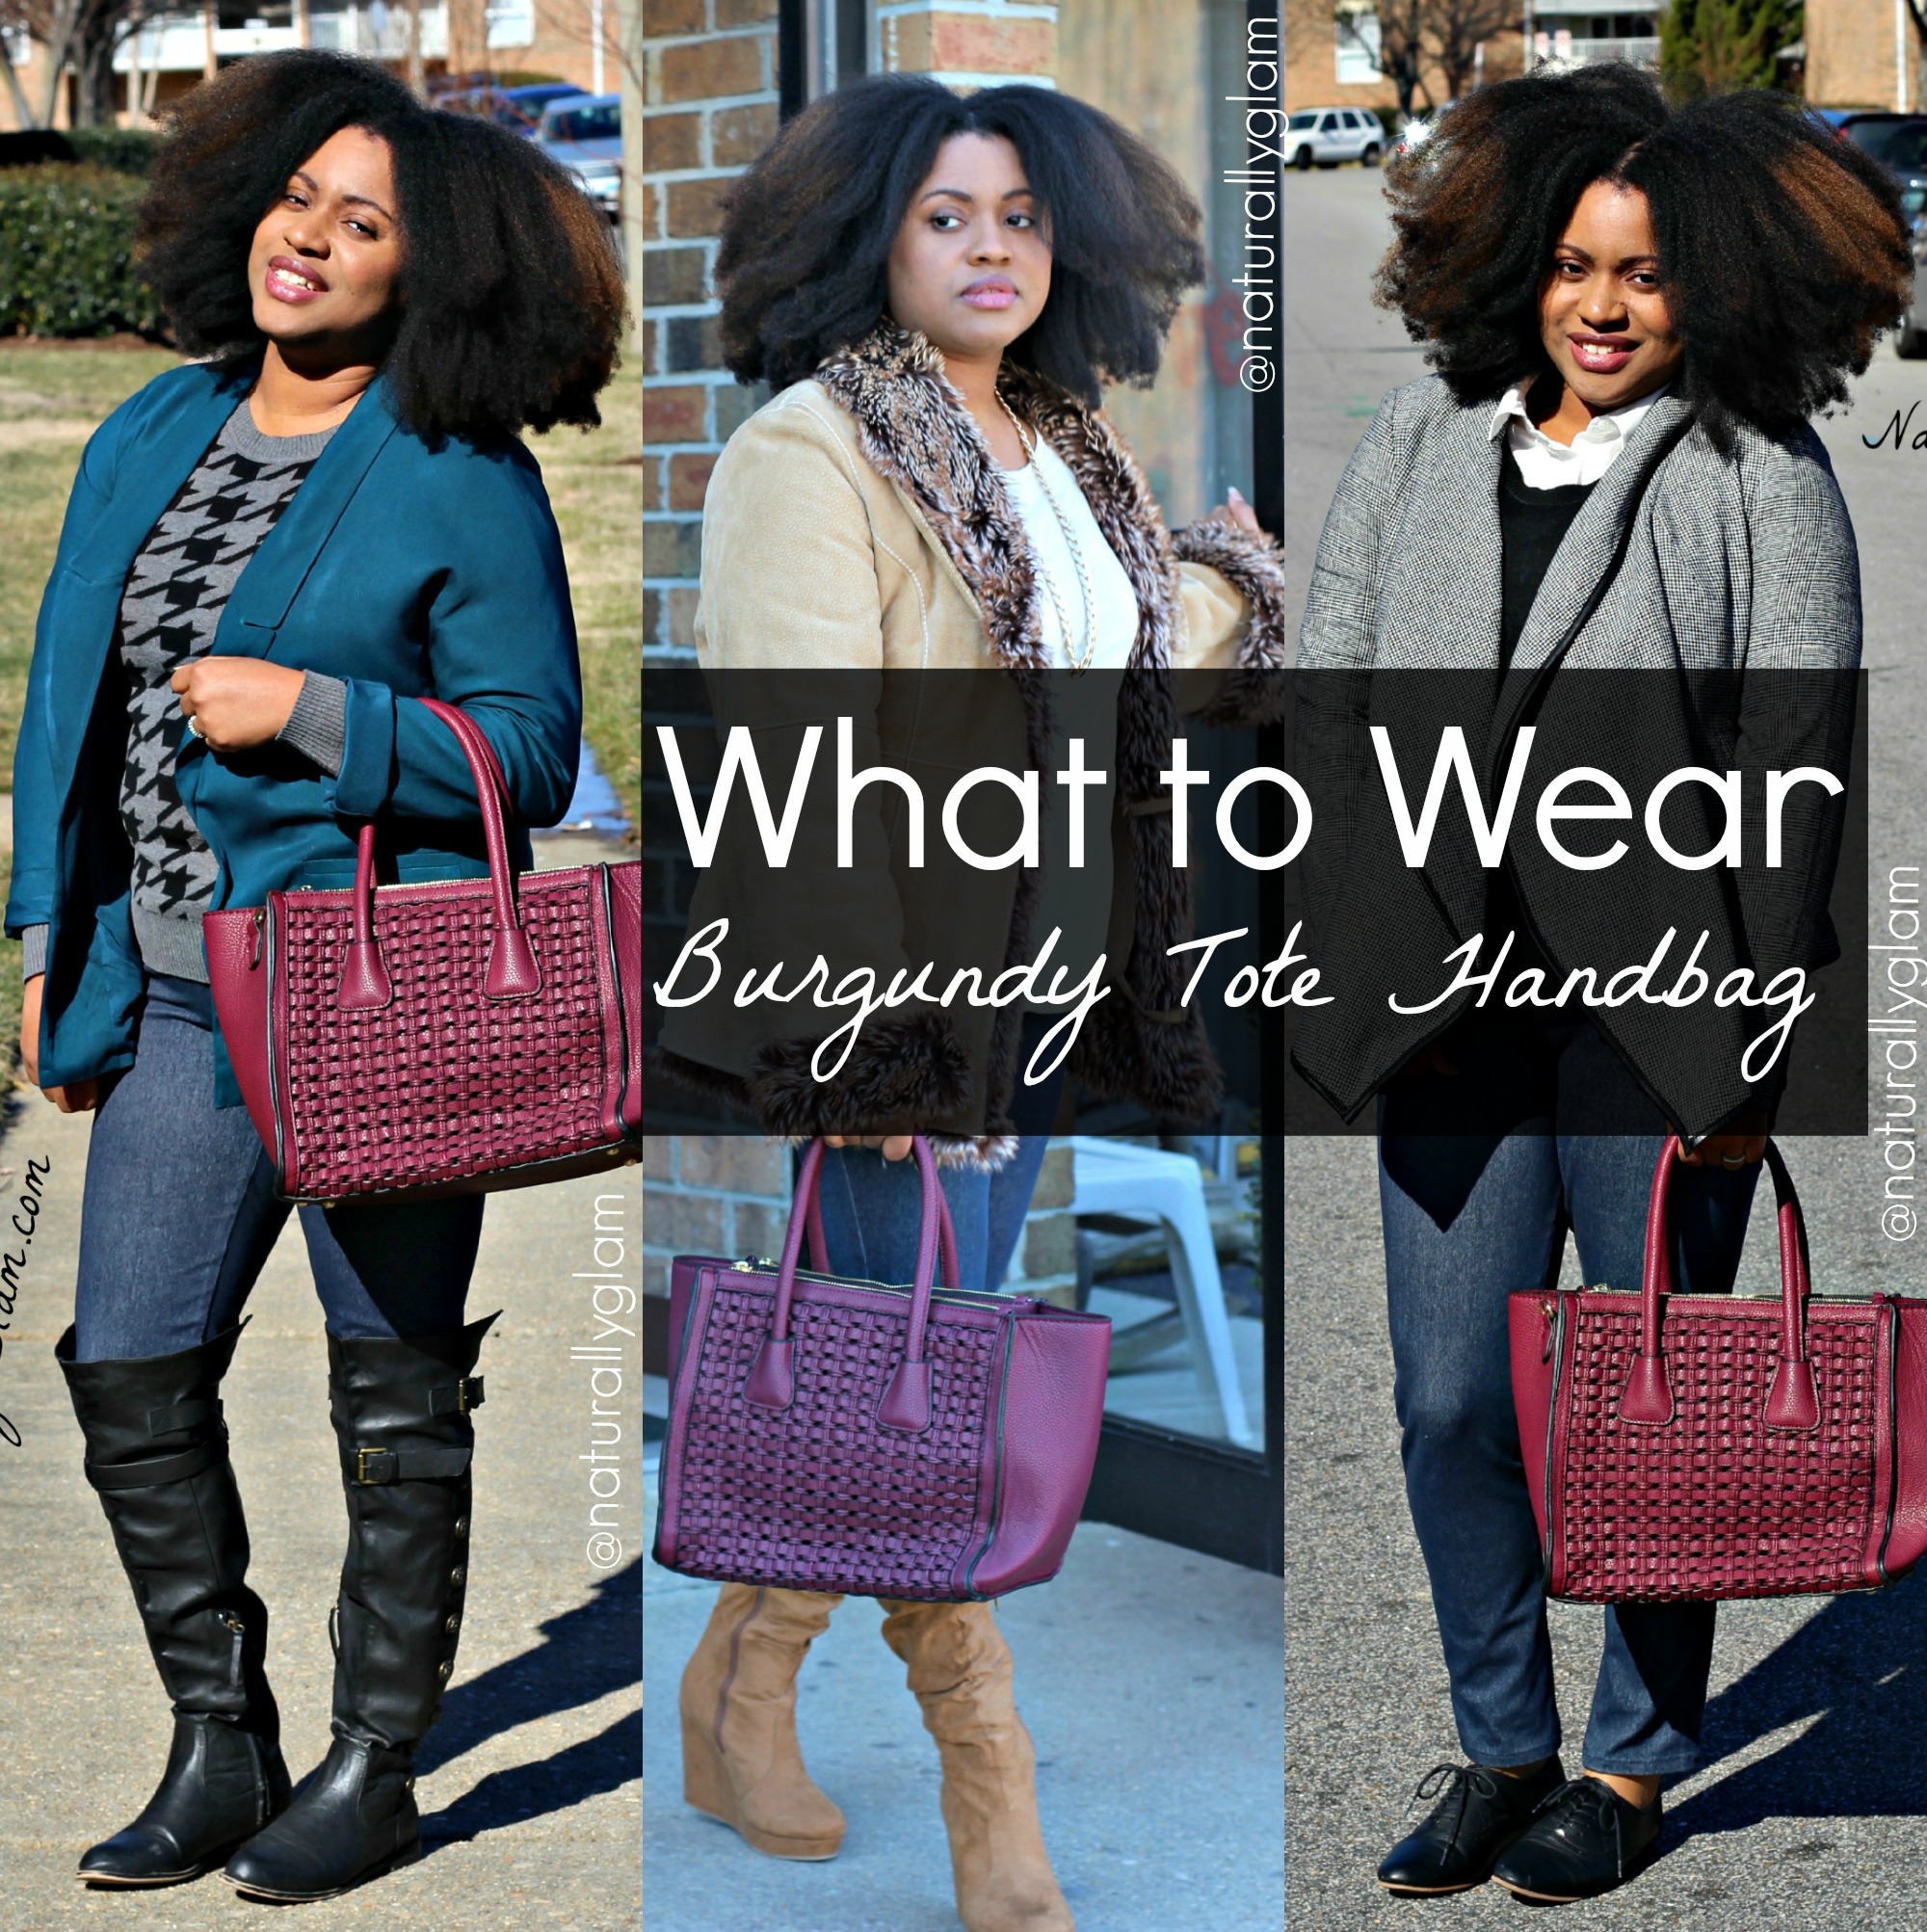 What to Wear with a Burgundy Tote Handbag | Winter Lookbook